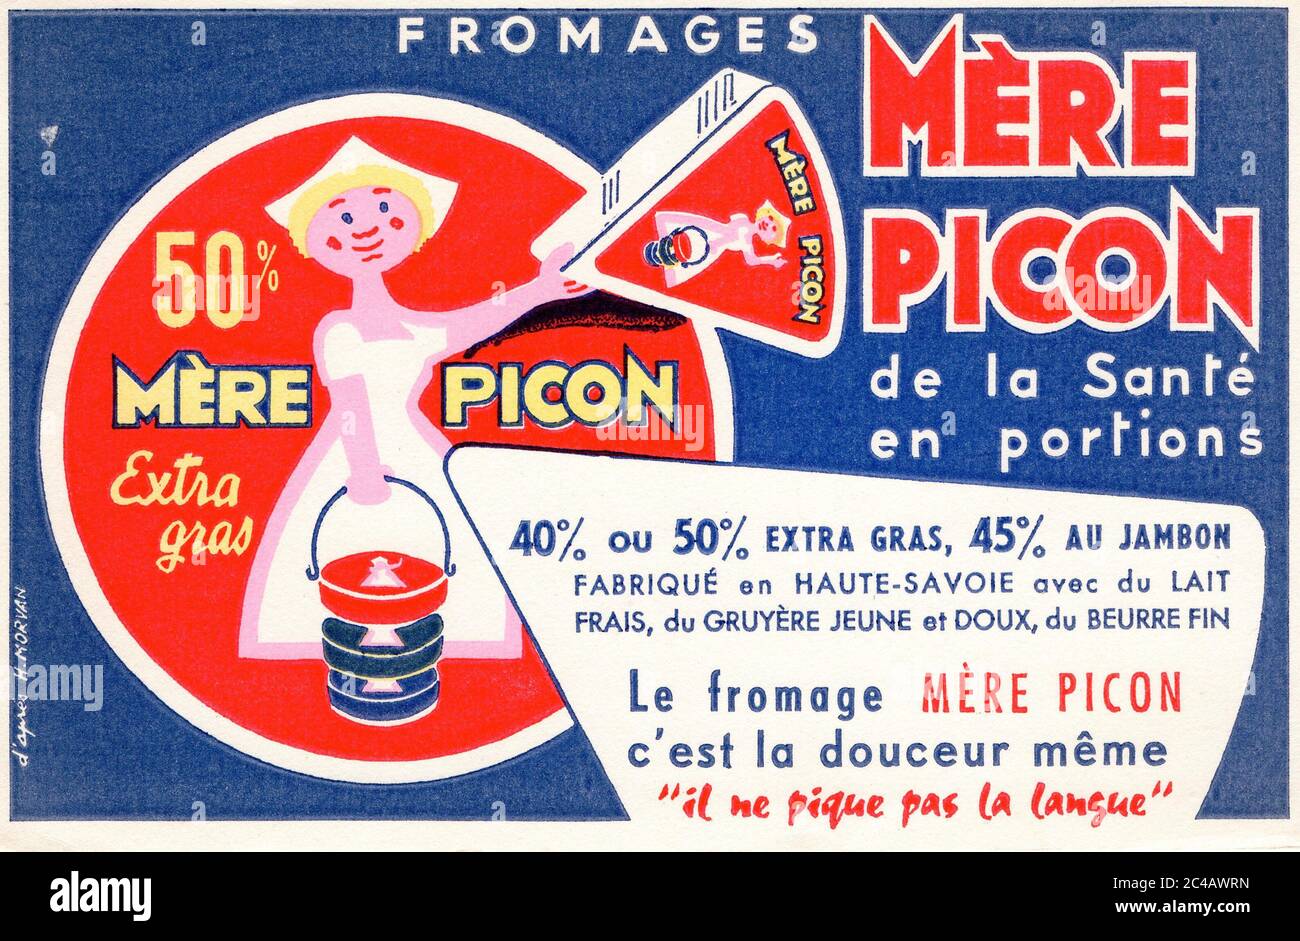 Buvard Fromage Fondu Mere Picon Vers 1955 Mere Picon Melted Cheese Blotter Circa 1955 Stock 